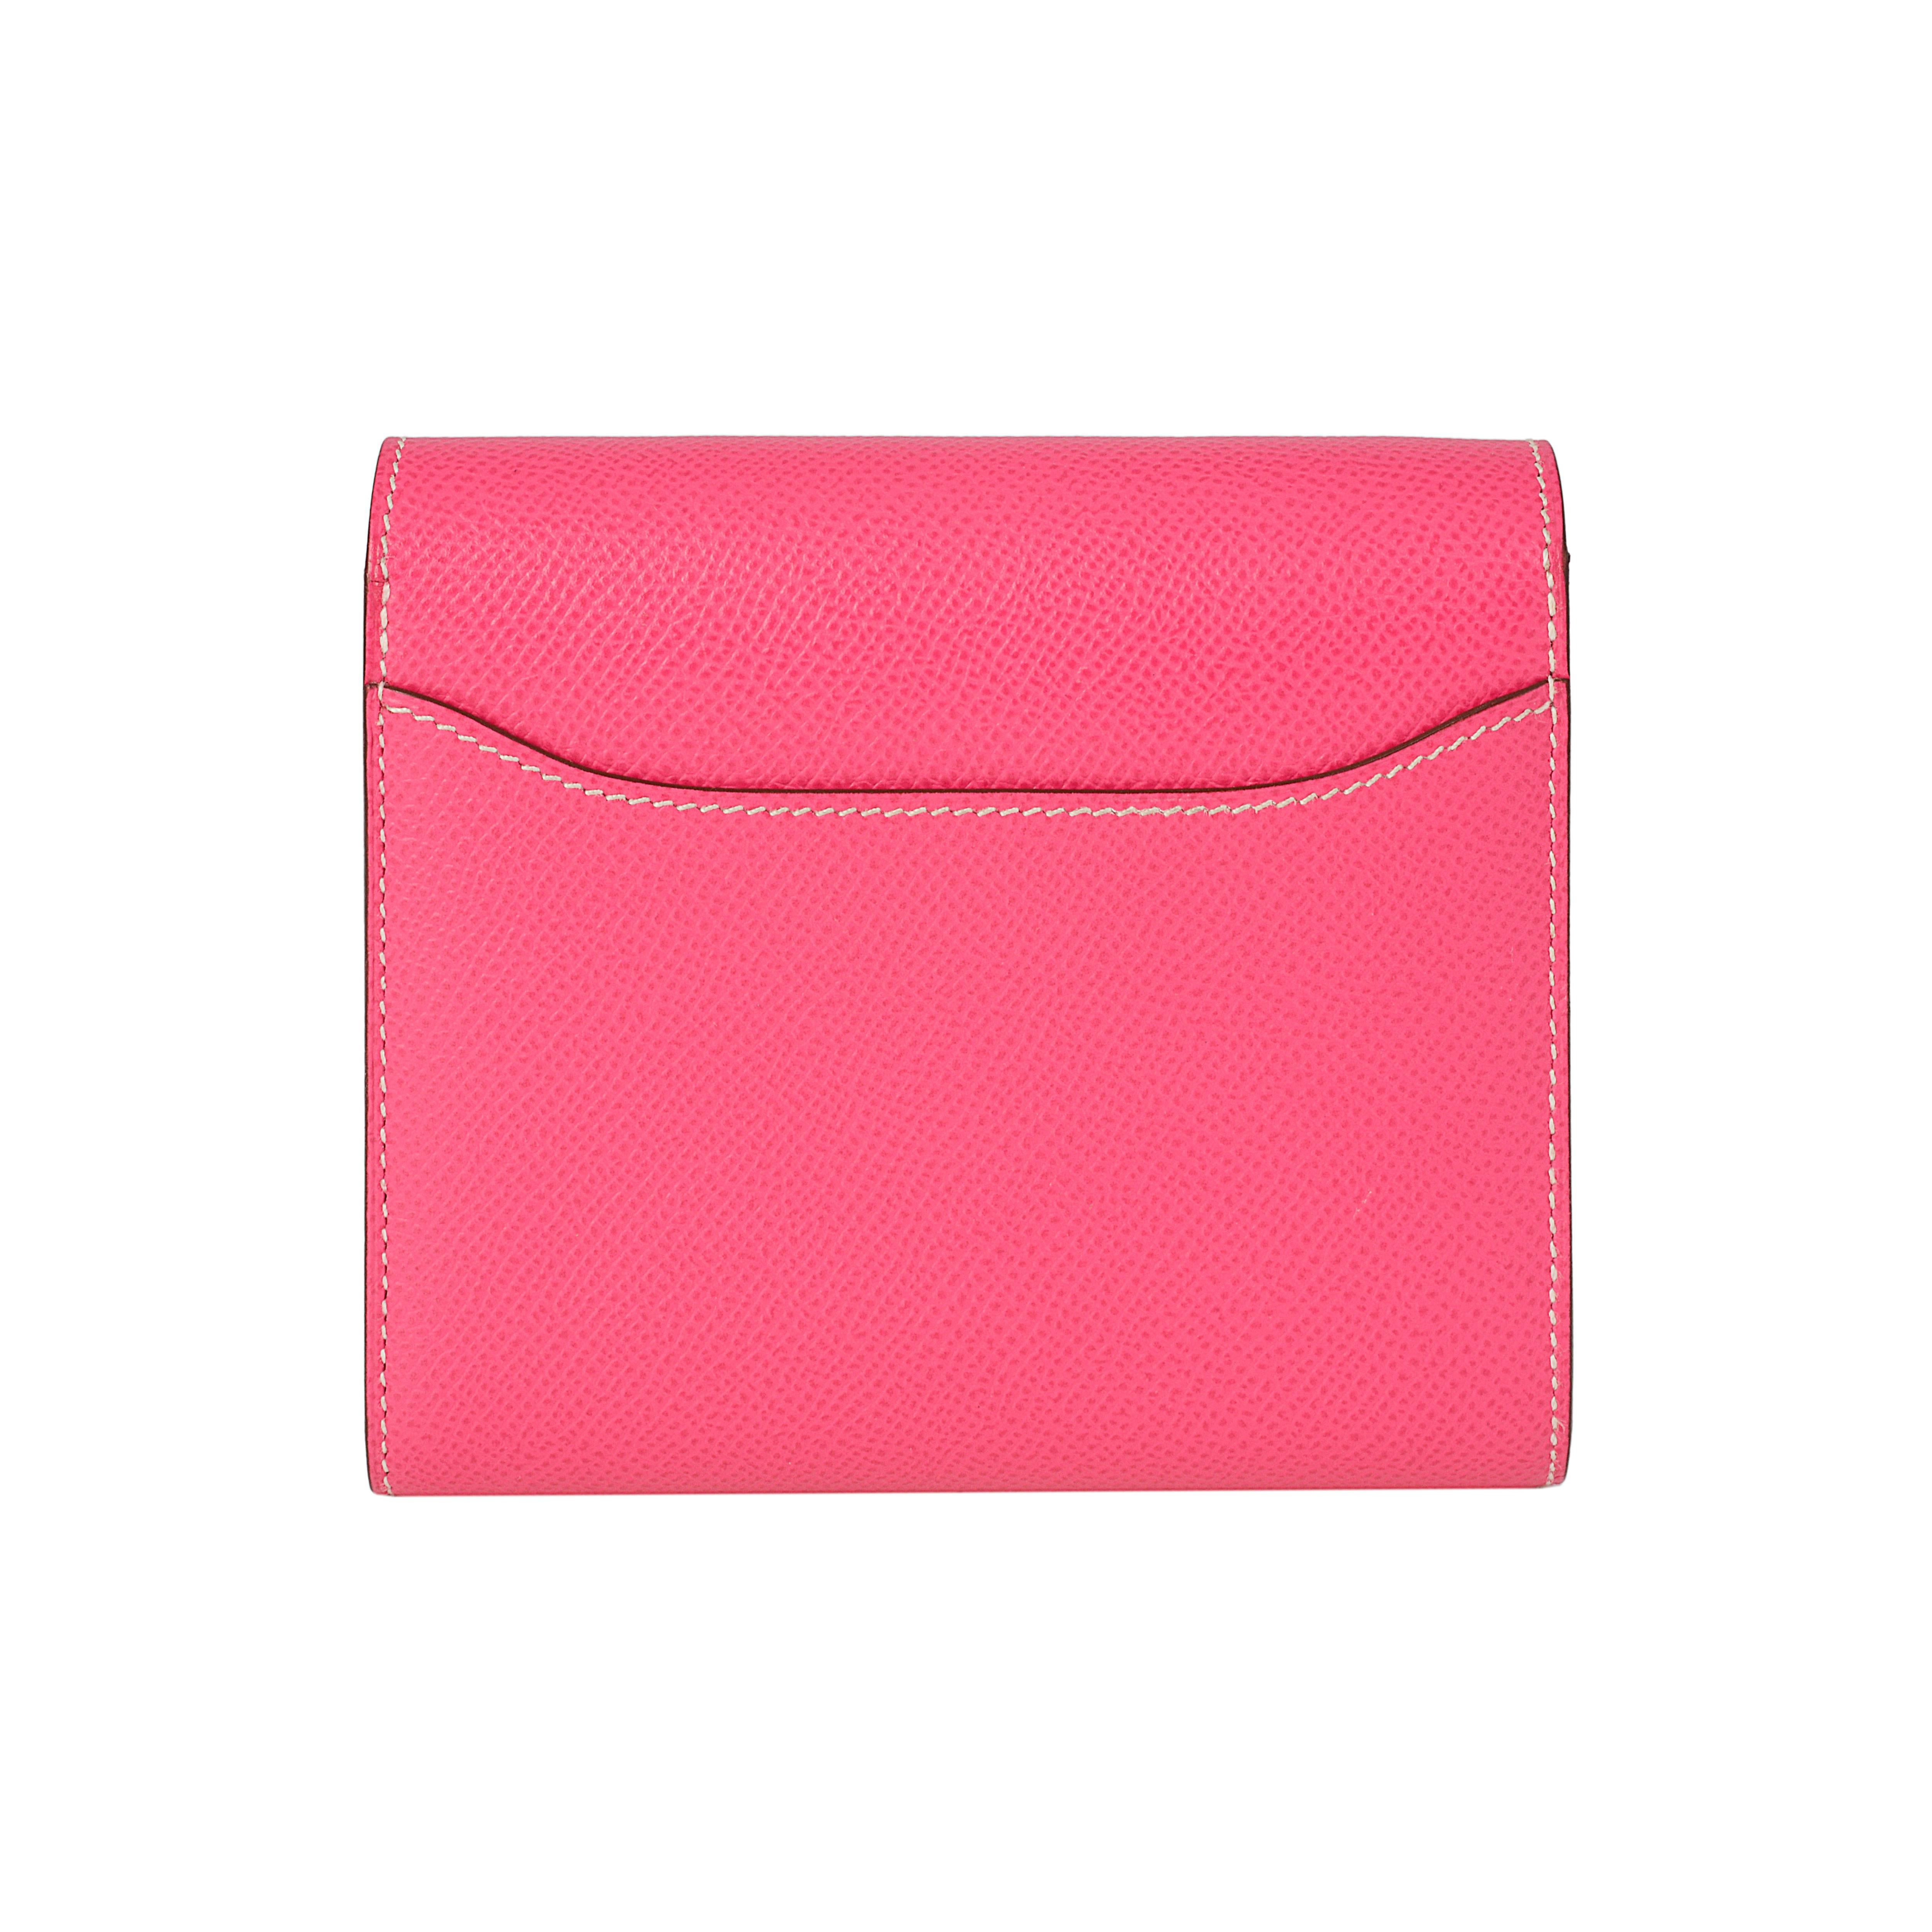 Hermes Rose Tyrien Epsom Leather Constance Compact  1